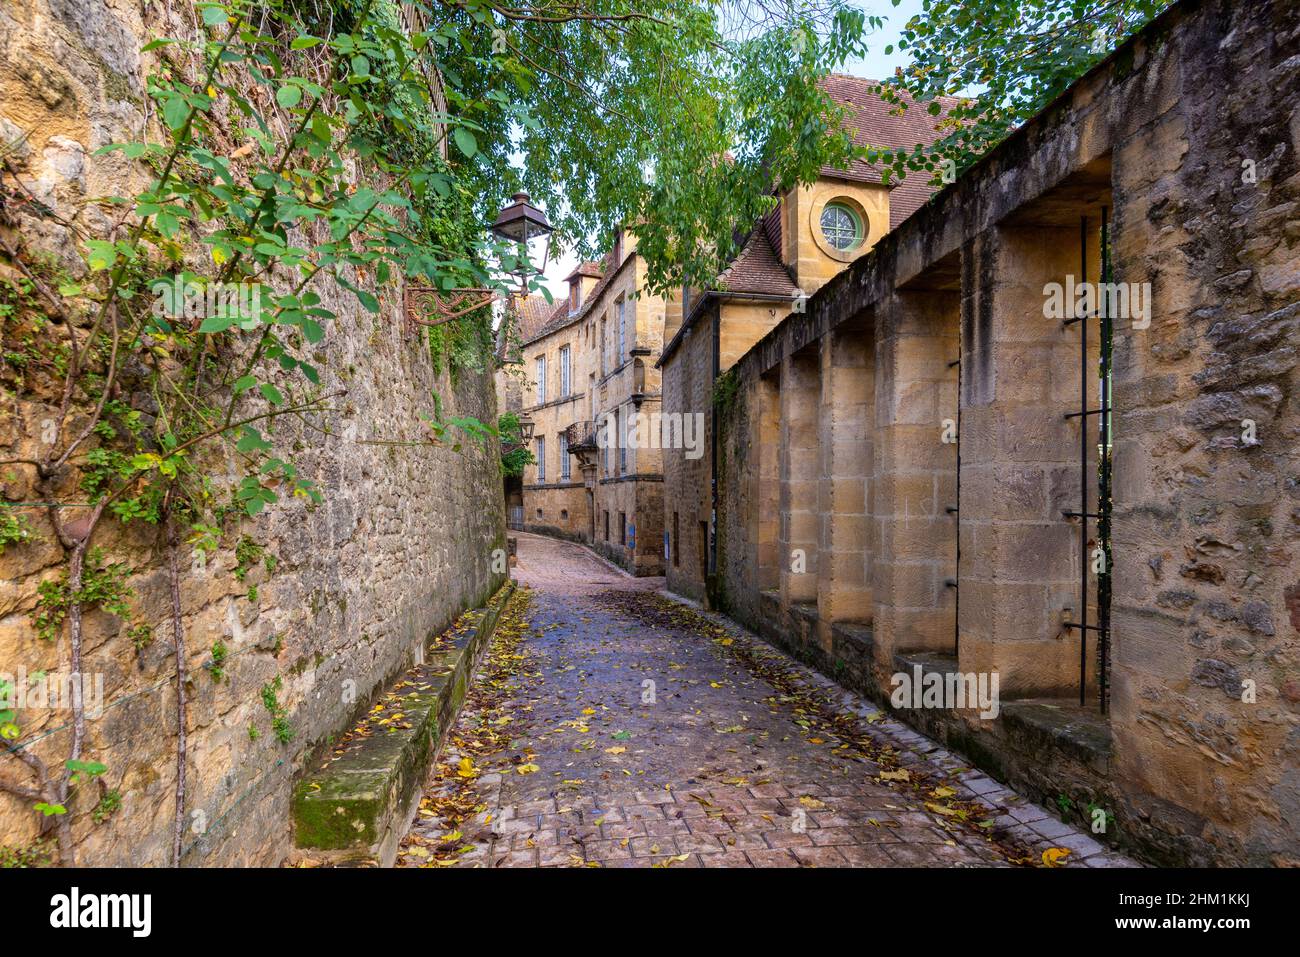 The narrow street of a beautiful french yellow stone medieval town of Sarlat-la-Caneda located in Perigord, France, taken on a sunny autumn afternoon Stock Photo